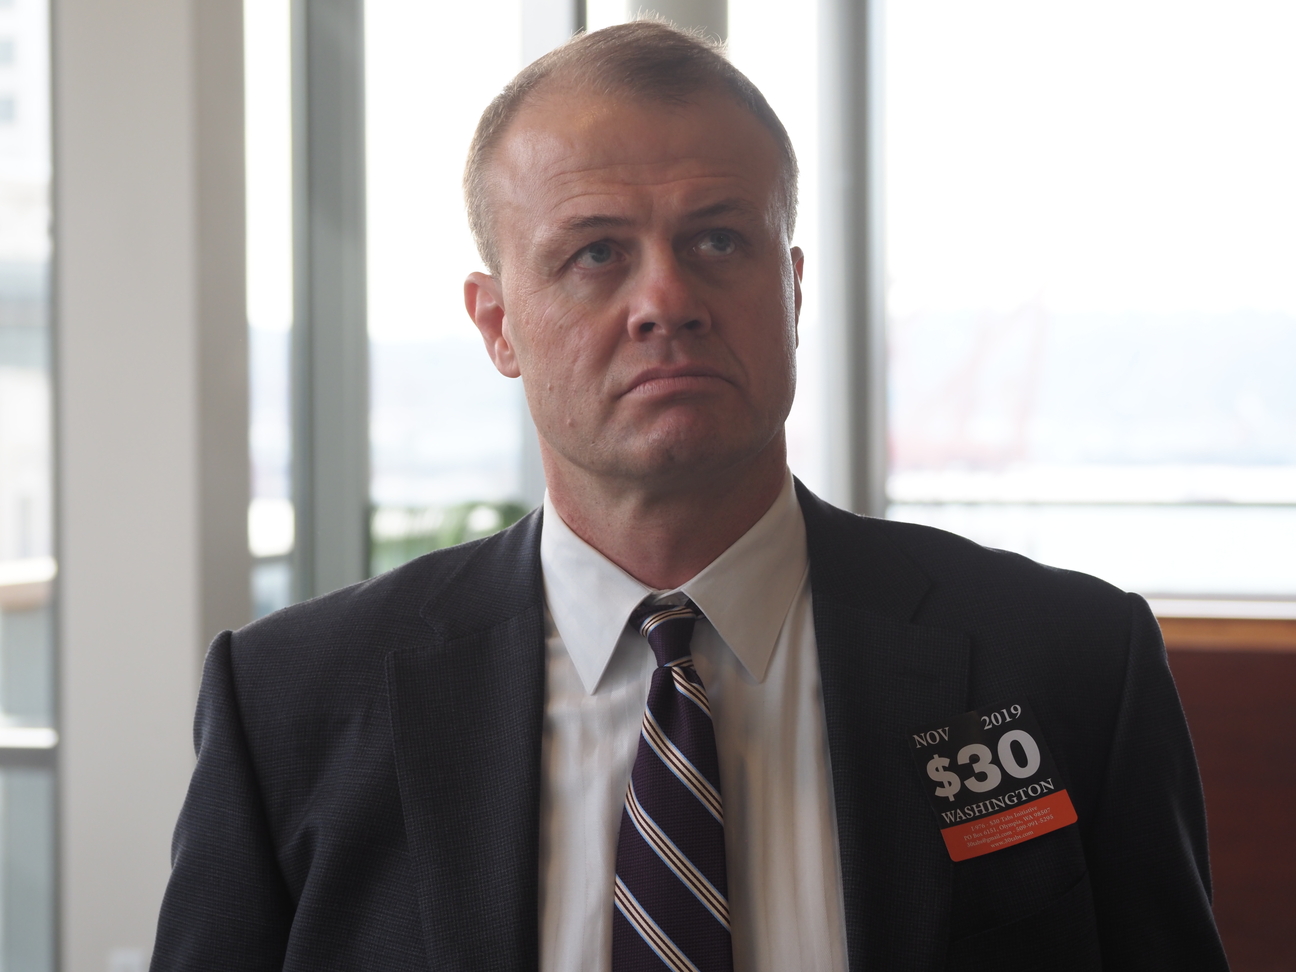 Tim Eyman listens uncomfortably during a confrontation with his opponents